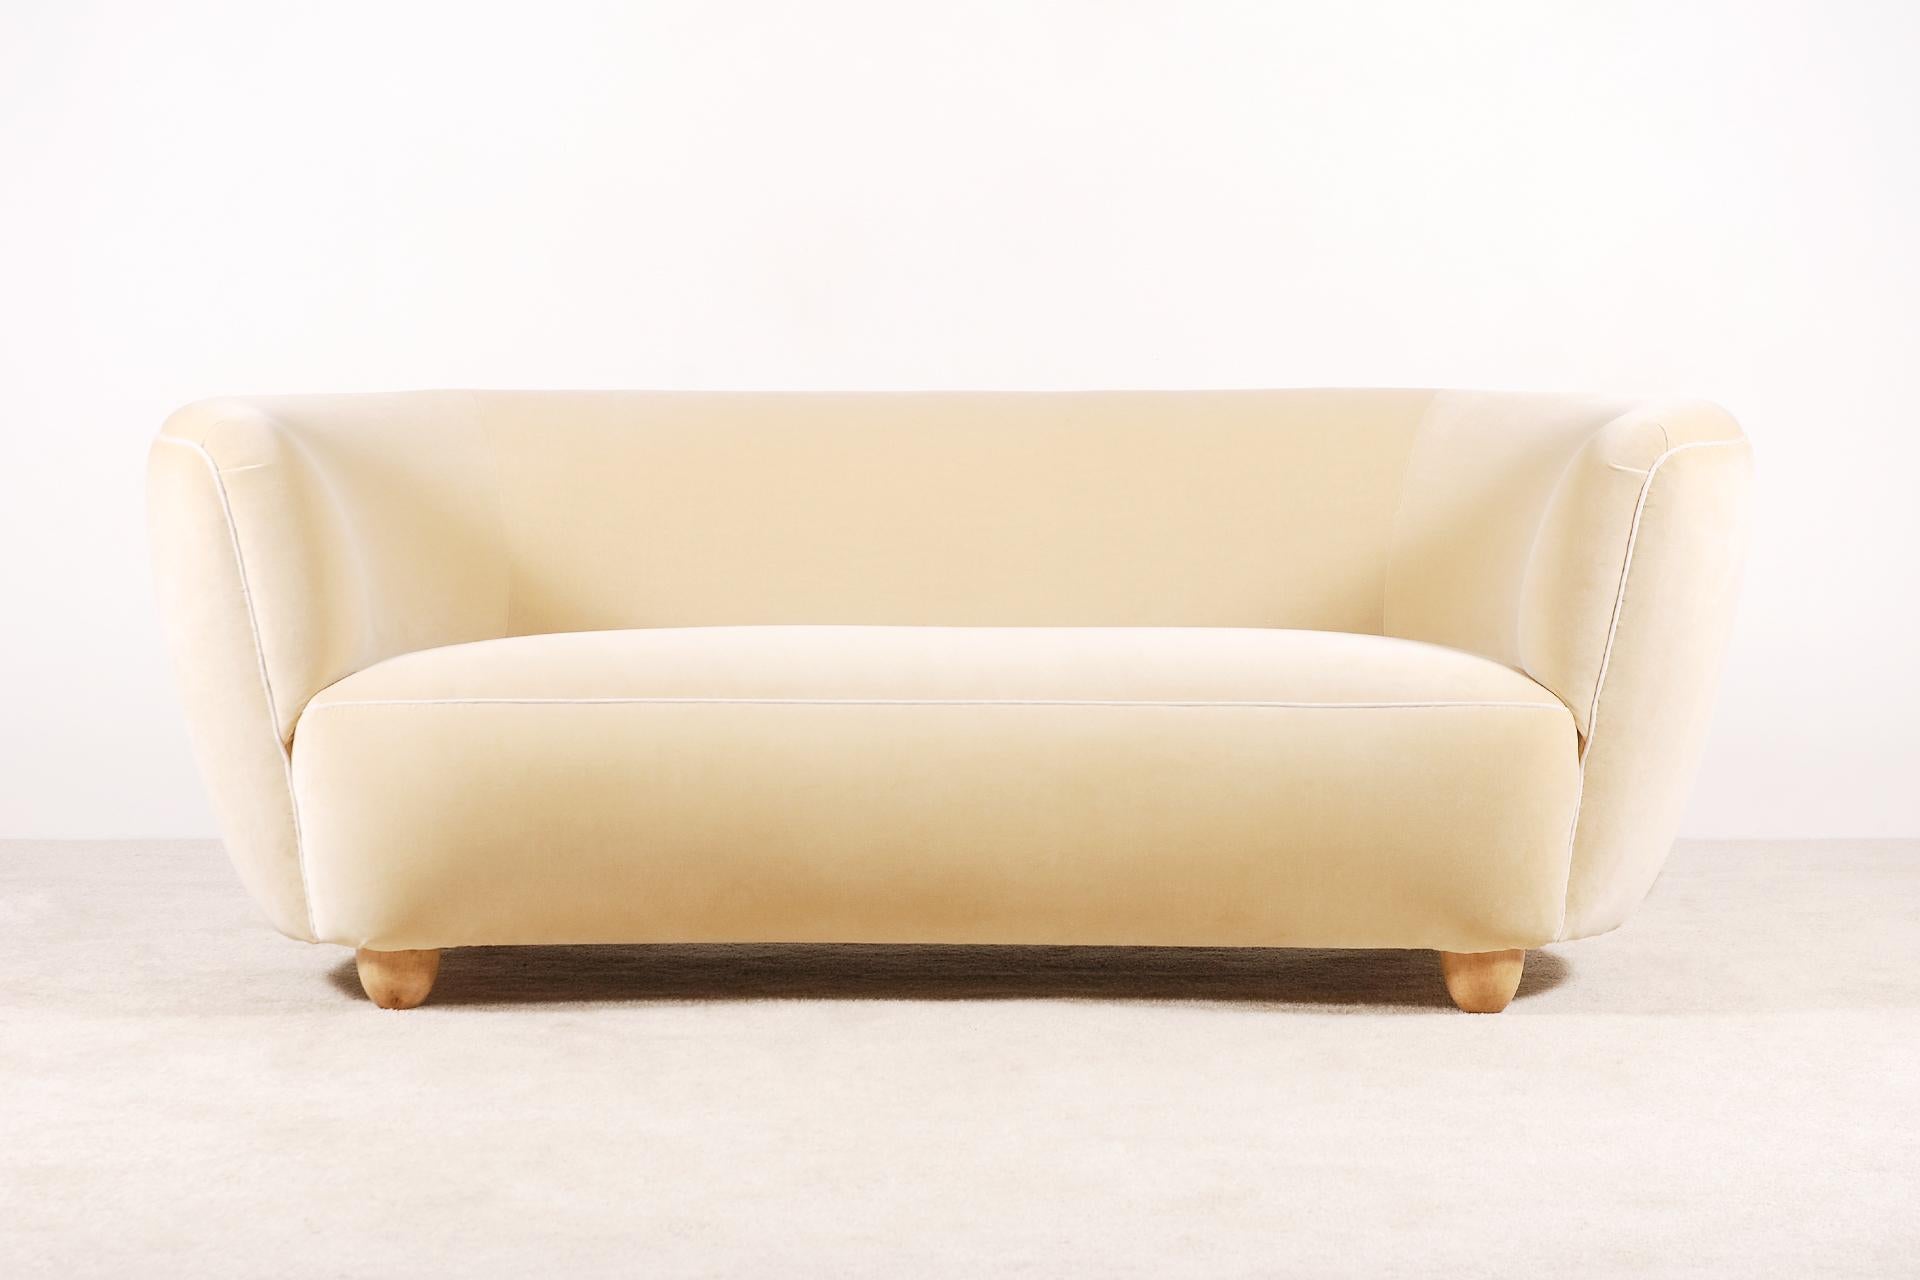 Rare and elegant three-seat curved sofa manufactured in Denmark, in the 1940s.
Very soft and comfortable seat. Light oak feet.
Perfect condition.
This sofa has been fully restored and newly upholstered with a high quality cream/beige velvet